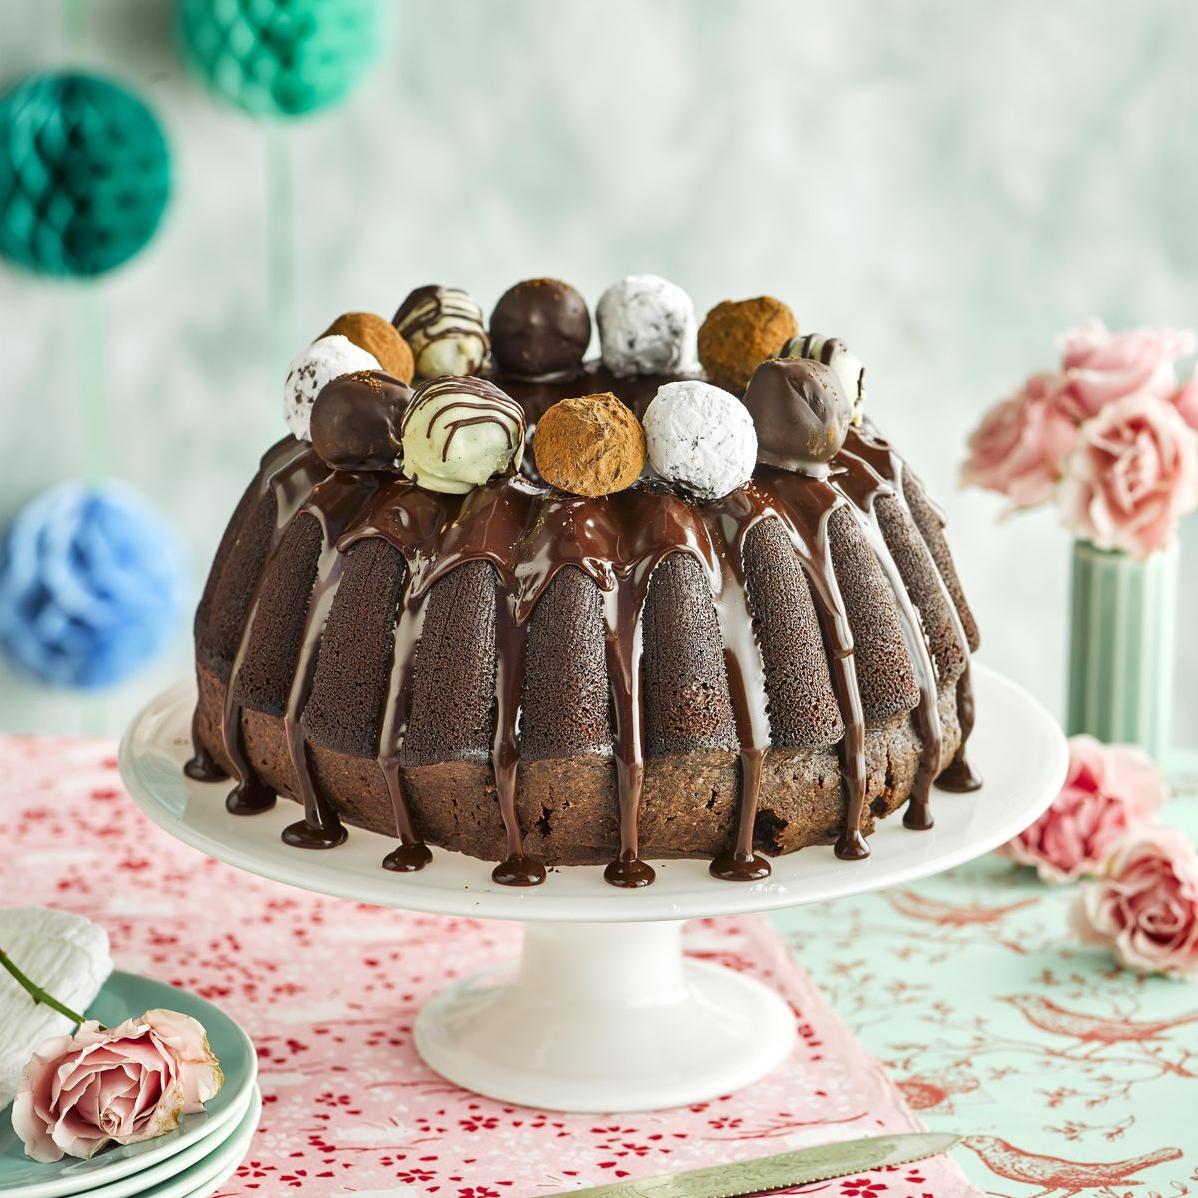  The glossy chocolate ganache on top adds an extra layer of indulgence to this cake.